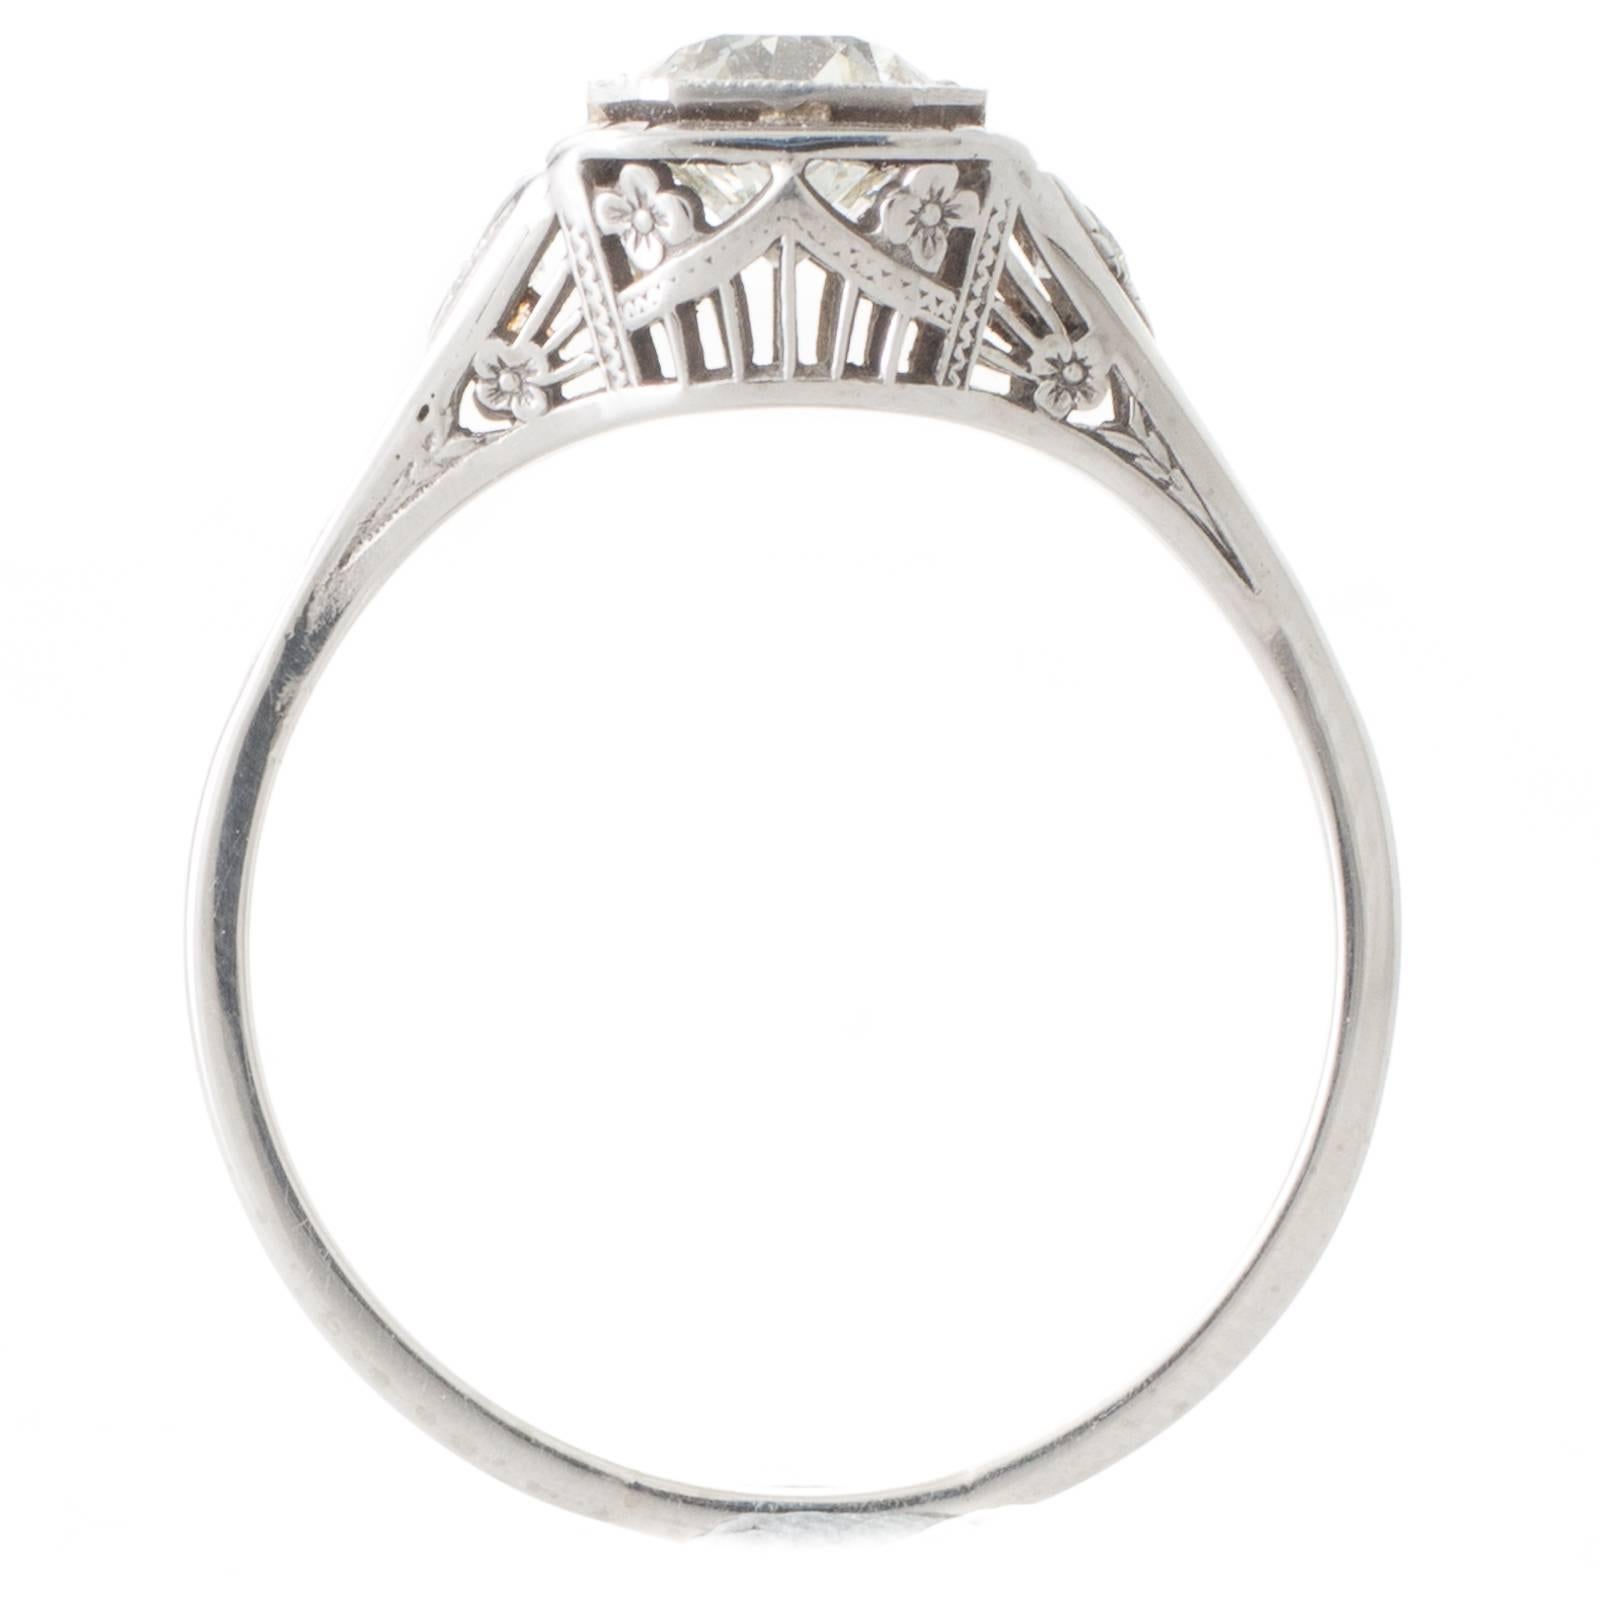 An 18ct white gold Art Deco solitaire ring featuring a 1.02ct old cut diamond, graded as colour I-J clarity VS1, bezel set within a mille grain edged spaced square plaque all above a detailed pierced and engraved gallery, the pierced tapering